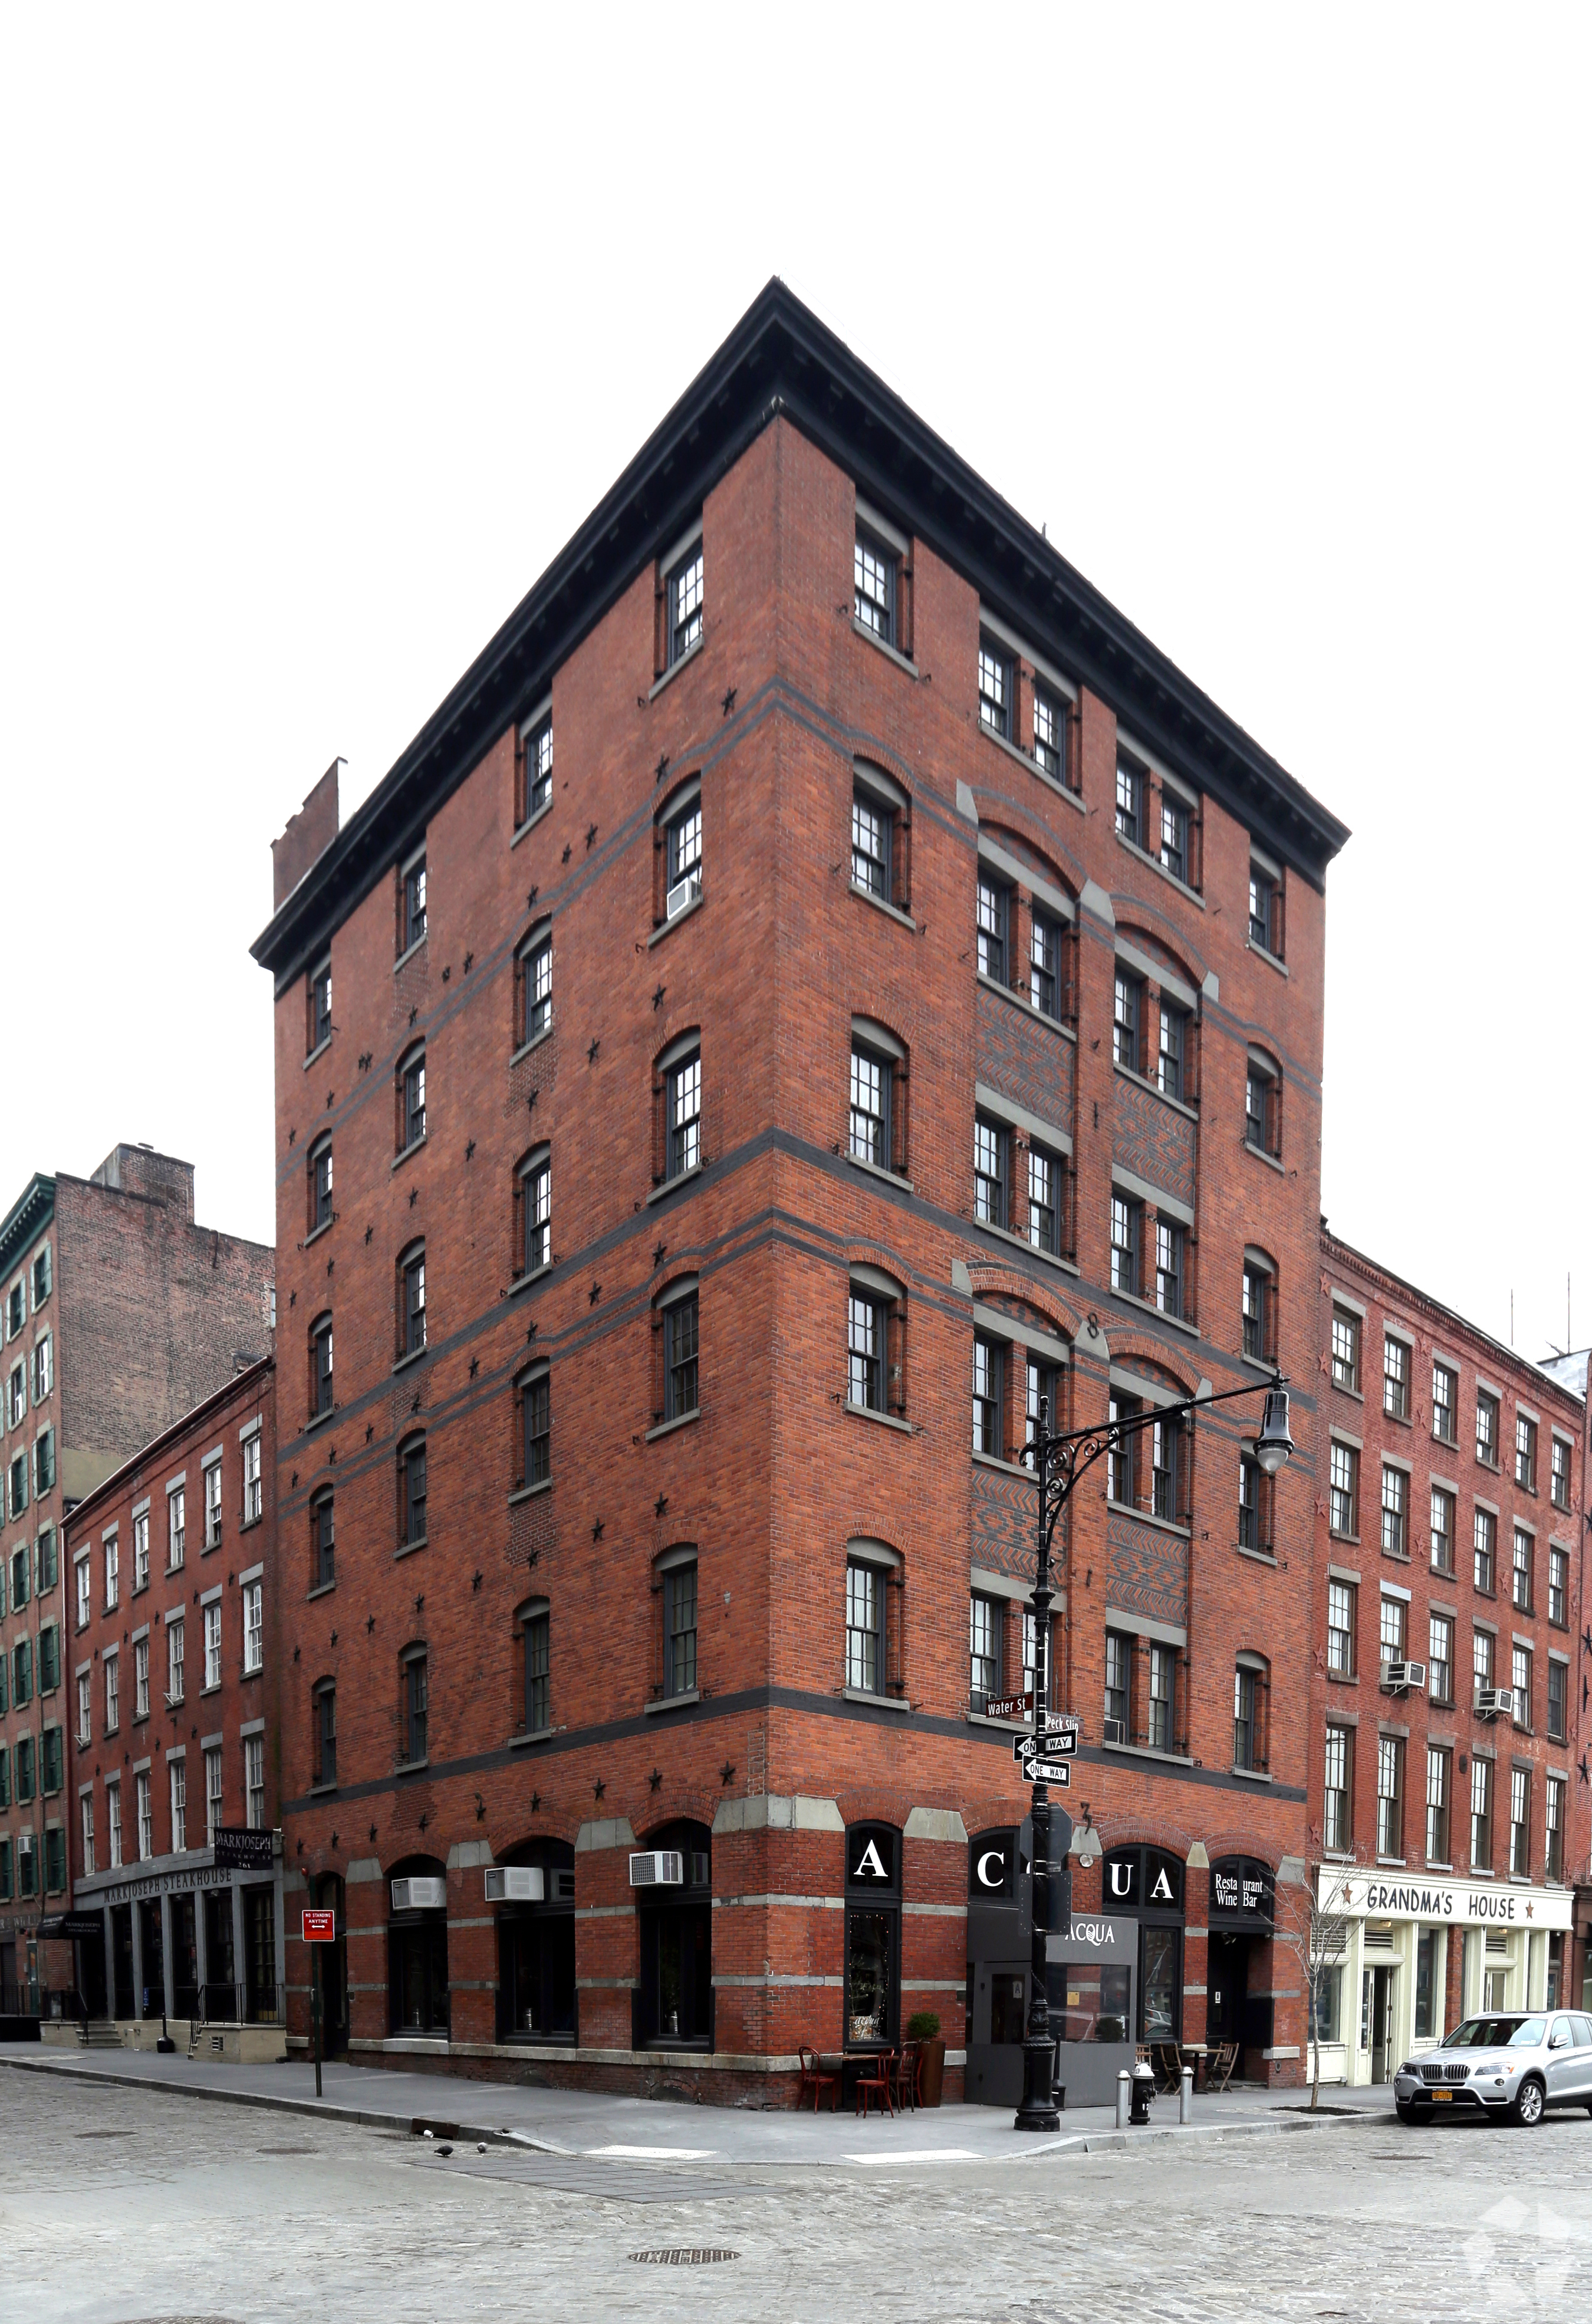 The New York Post: Stove Factory Lofts expected to sell for $30M